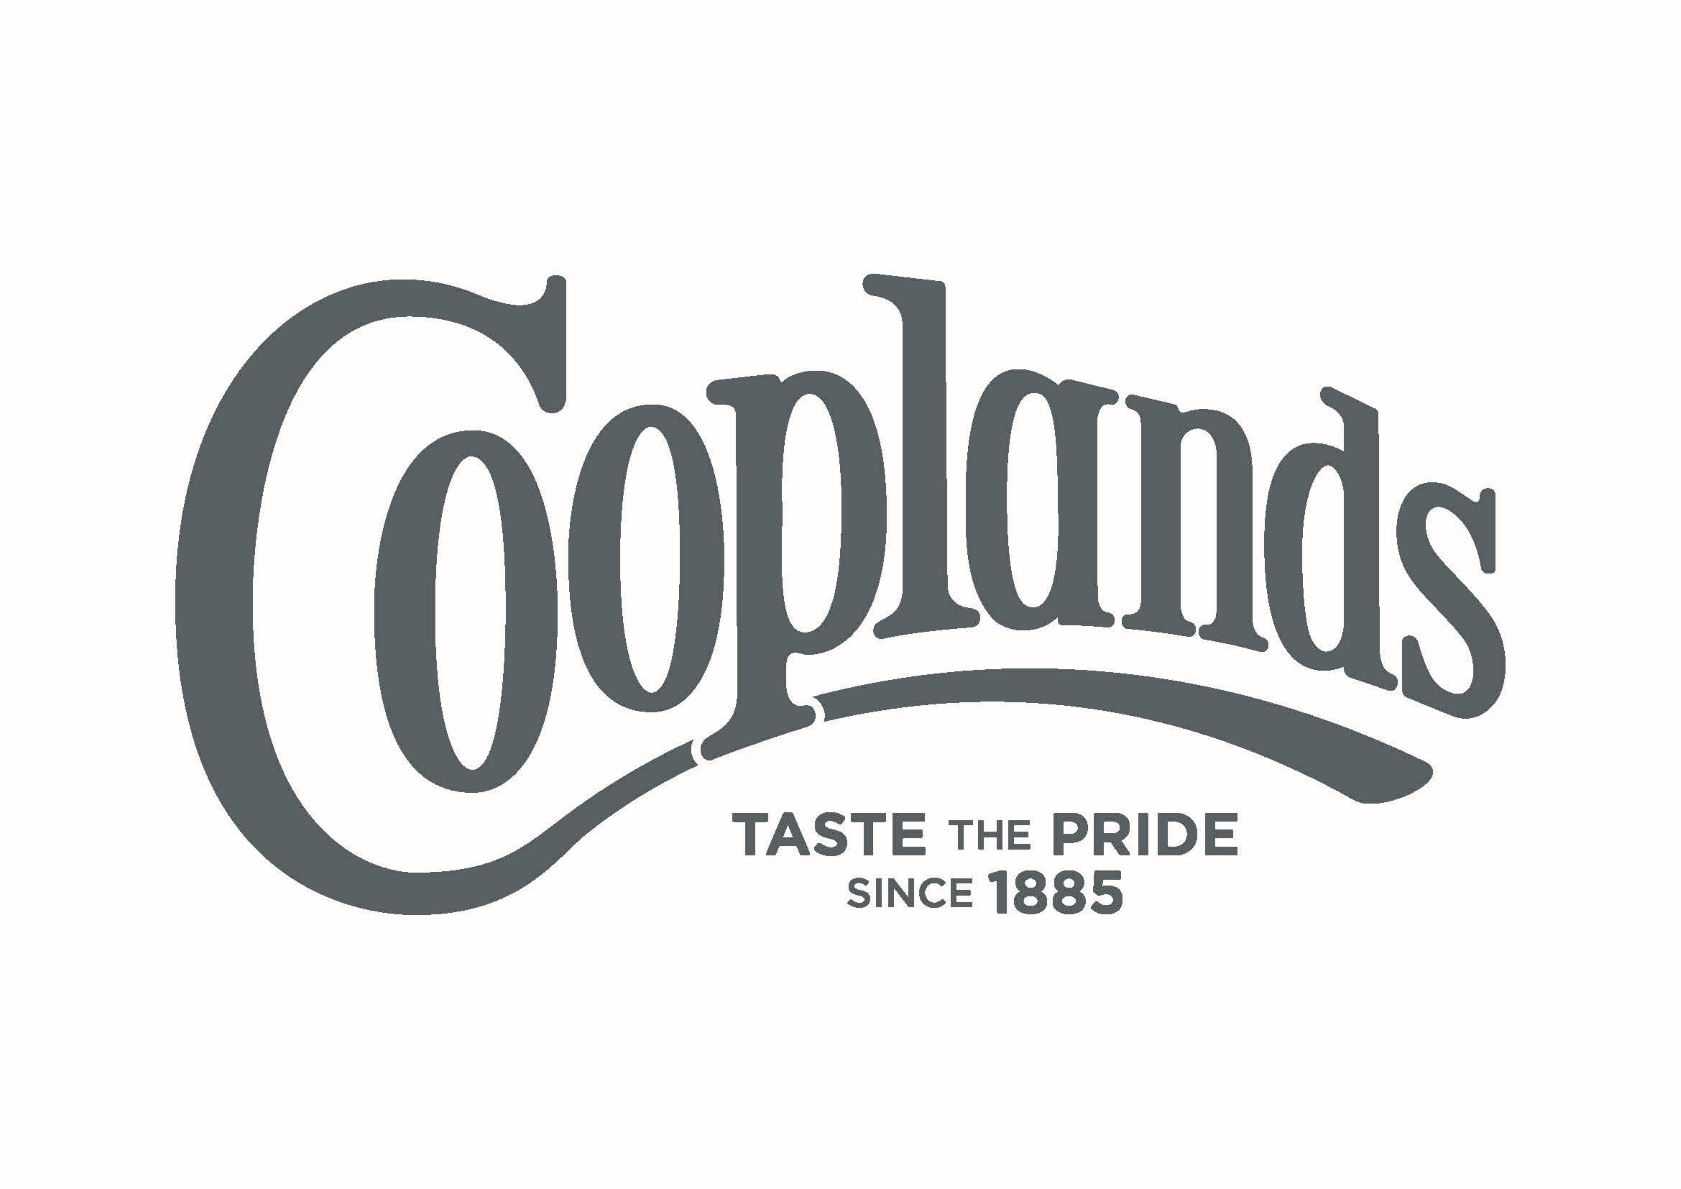 A successful strategic partnership for Retail and Manufacturing Bakers Cooplands 